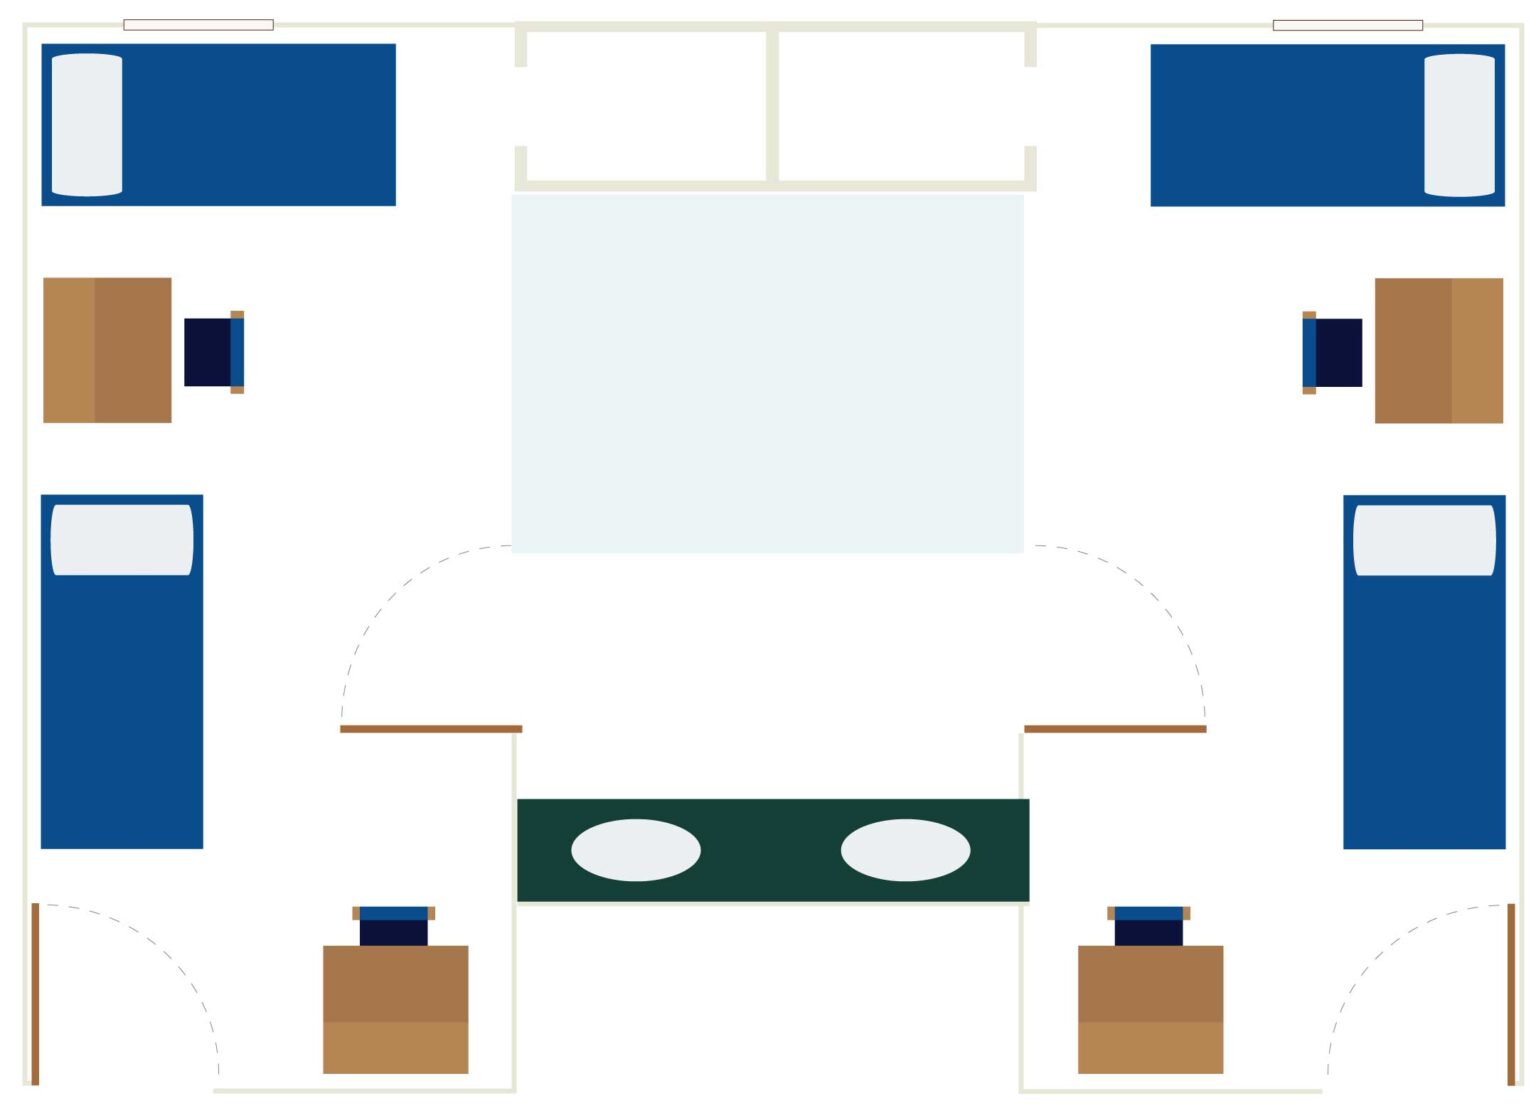 Clare Hall room blueprint showing one of many possible room configurations